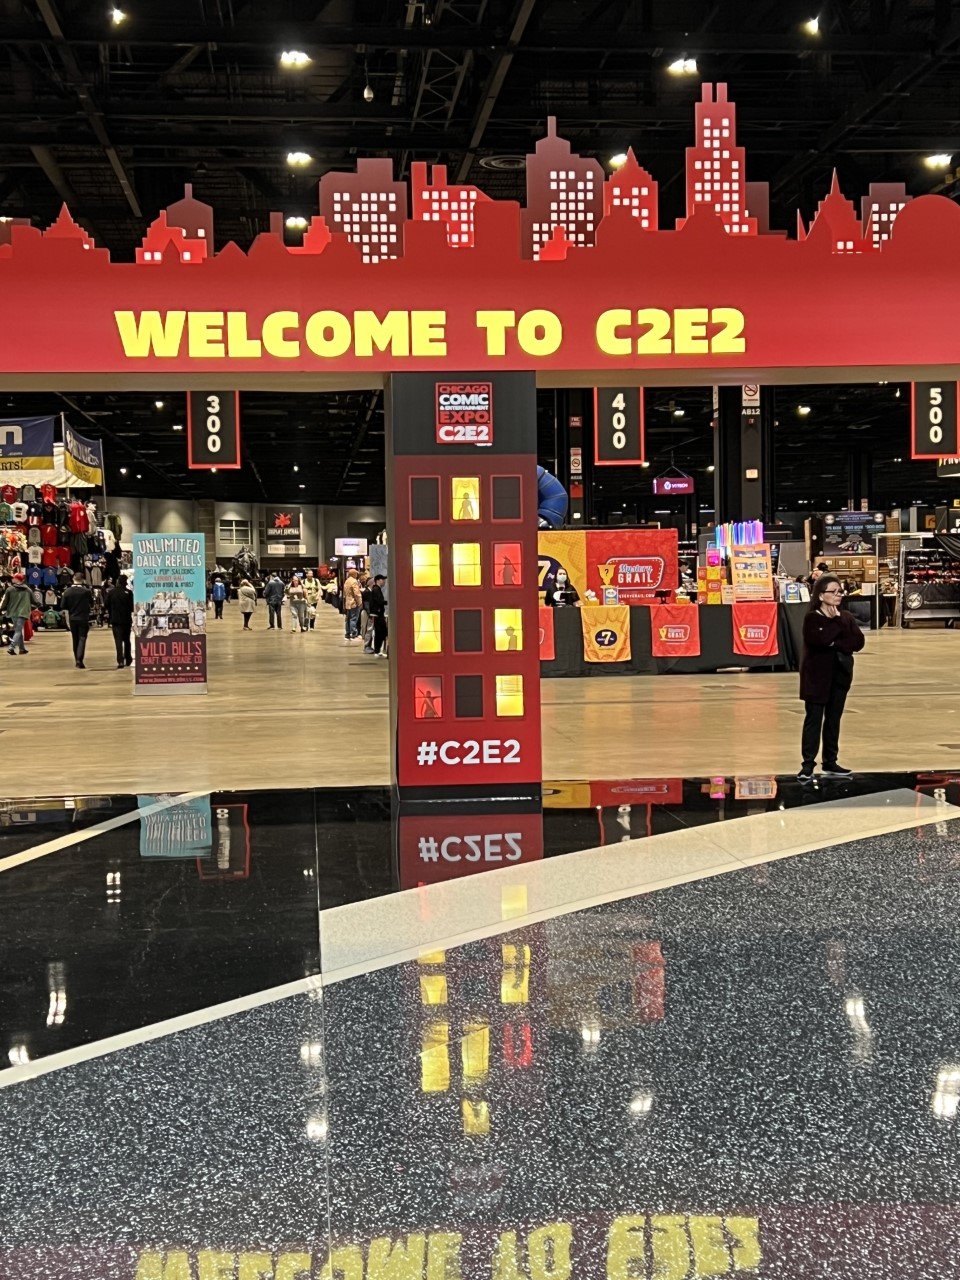 Cover SHot - Welcome to C2E2.jpg